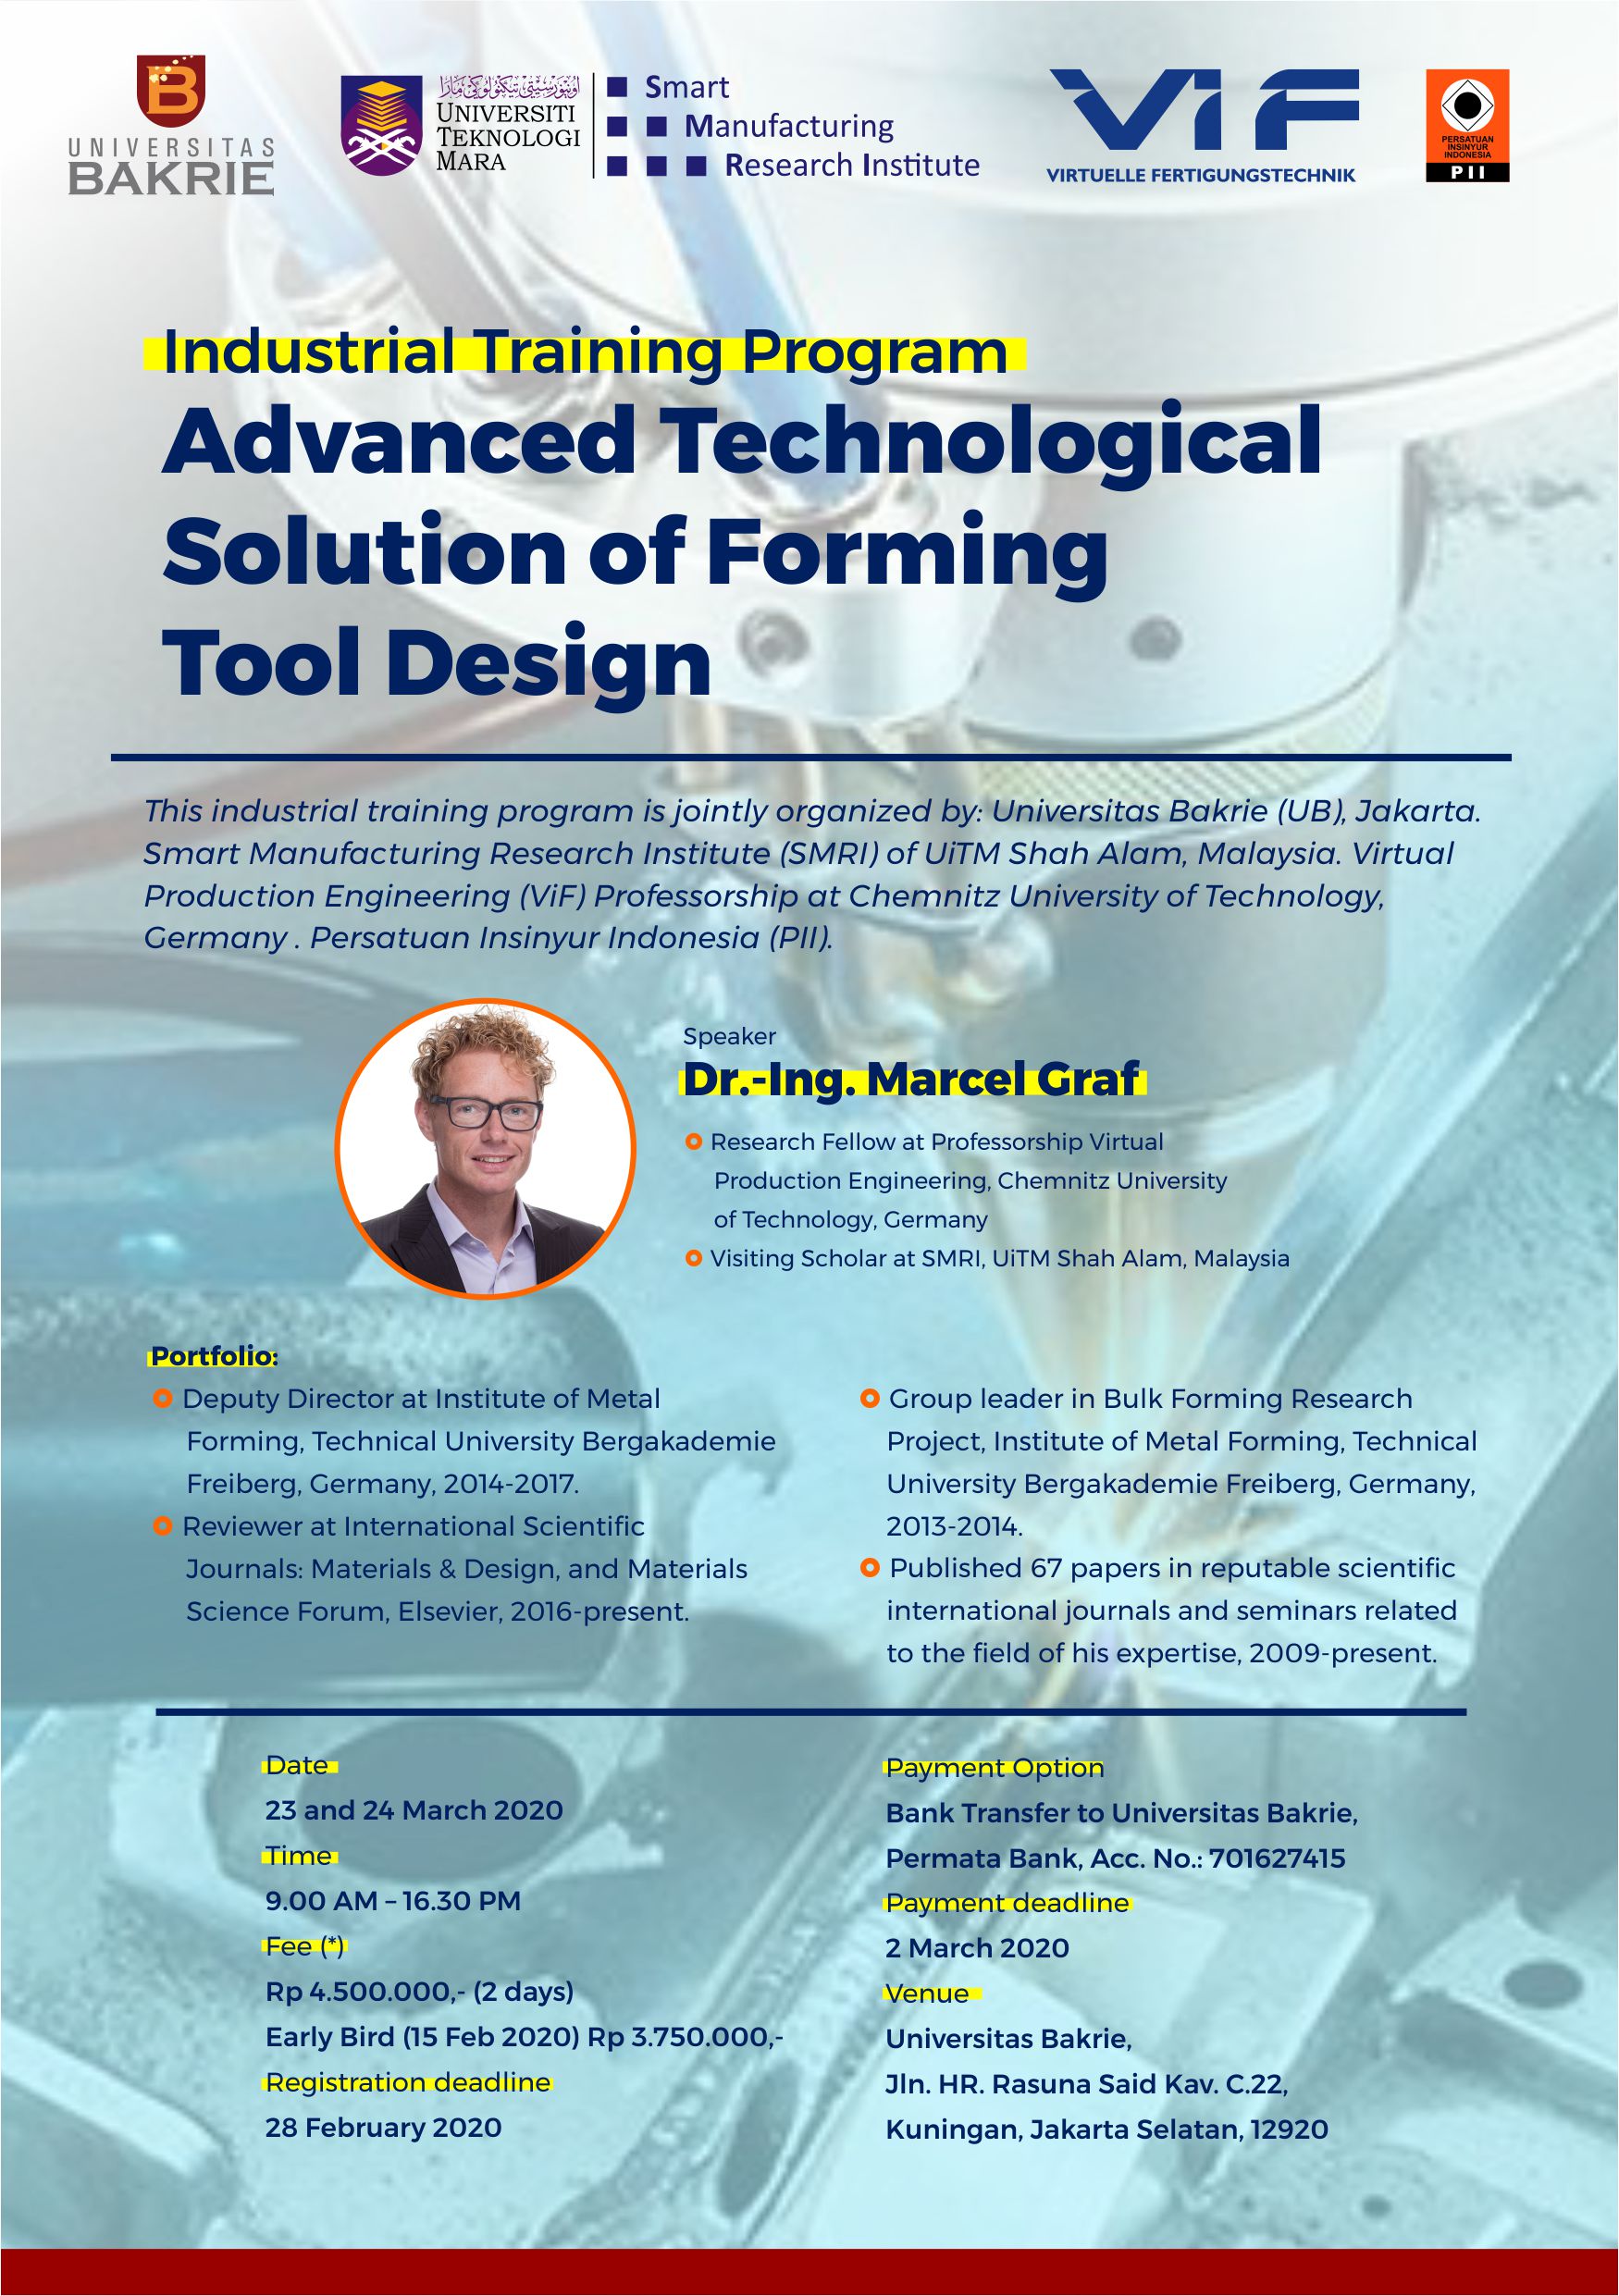 Industrial Training Program: “Advanced Technological Solution of Forming Tool Design